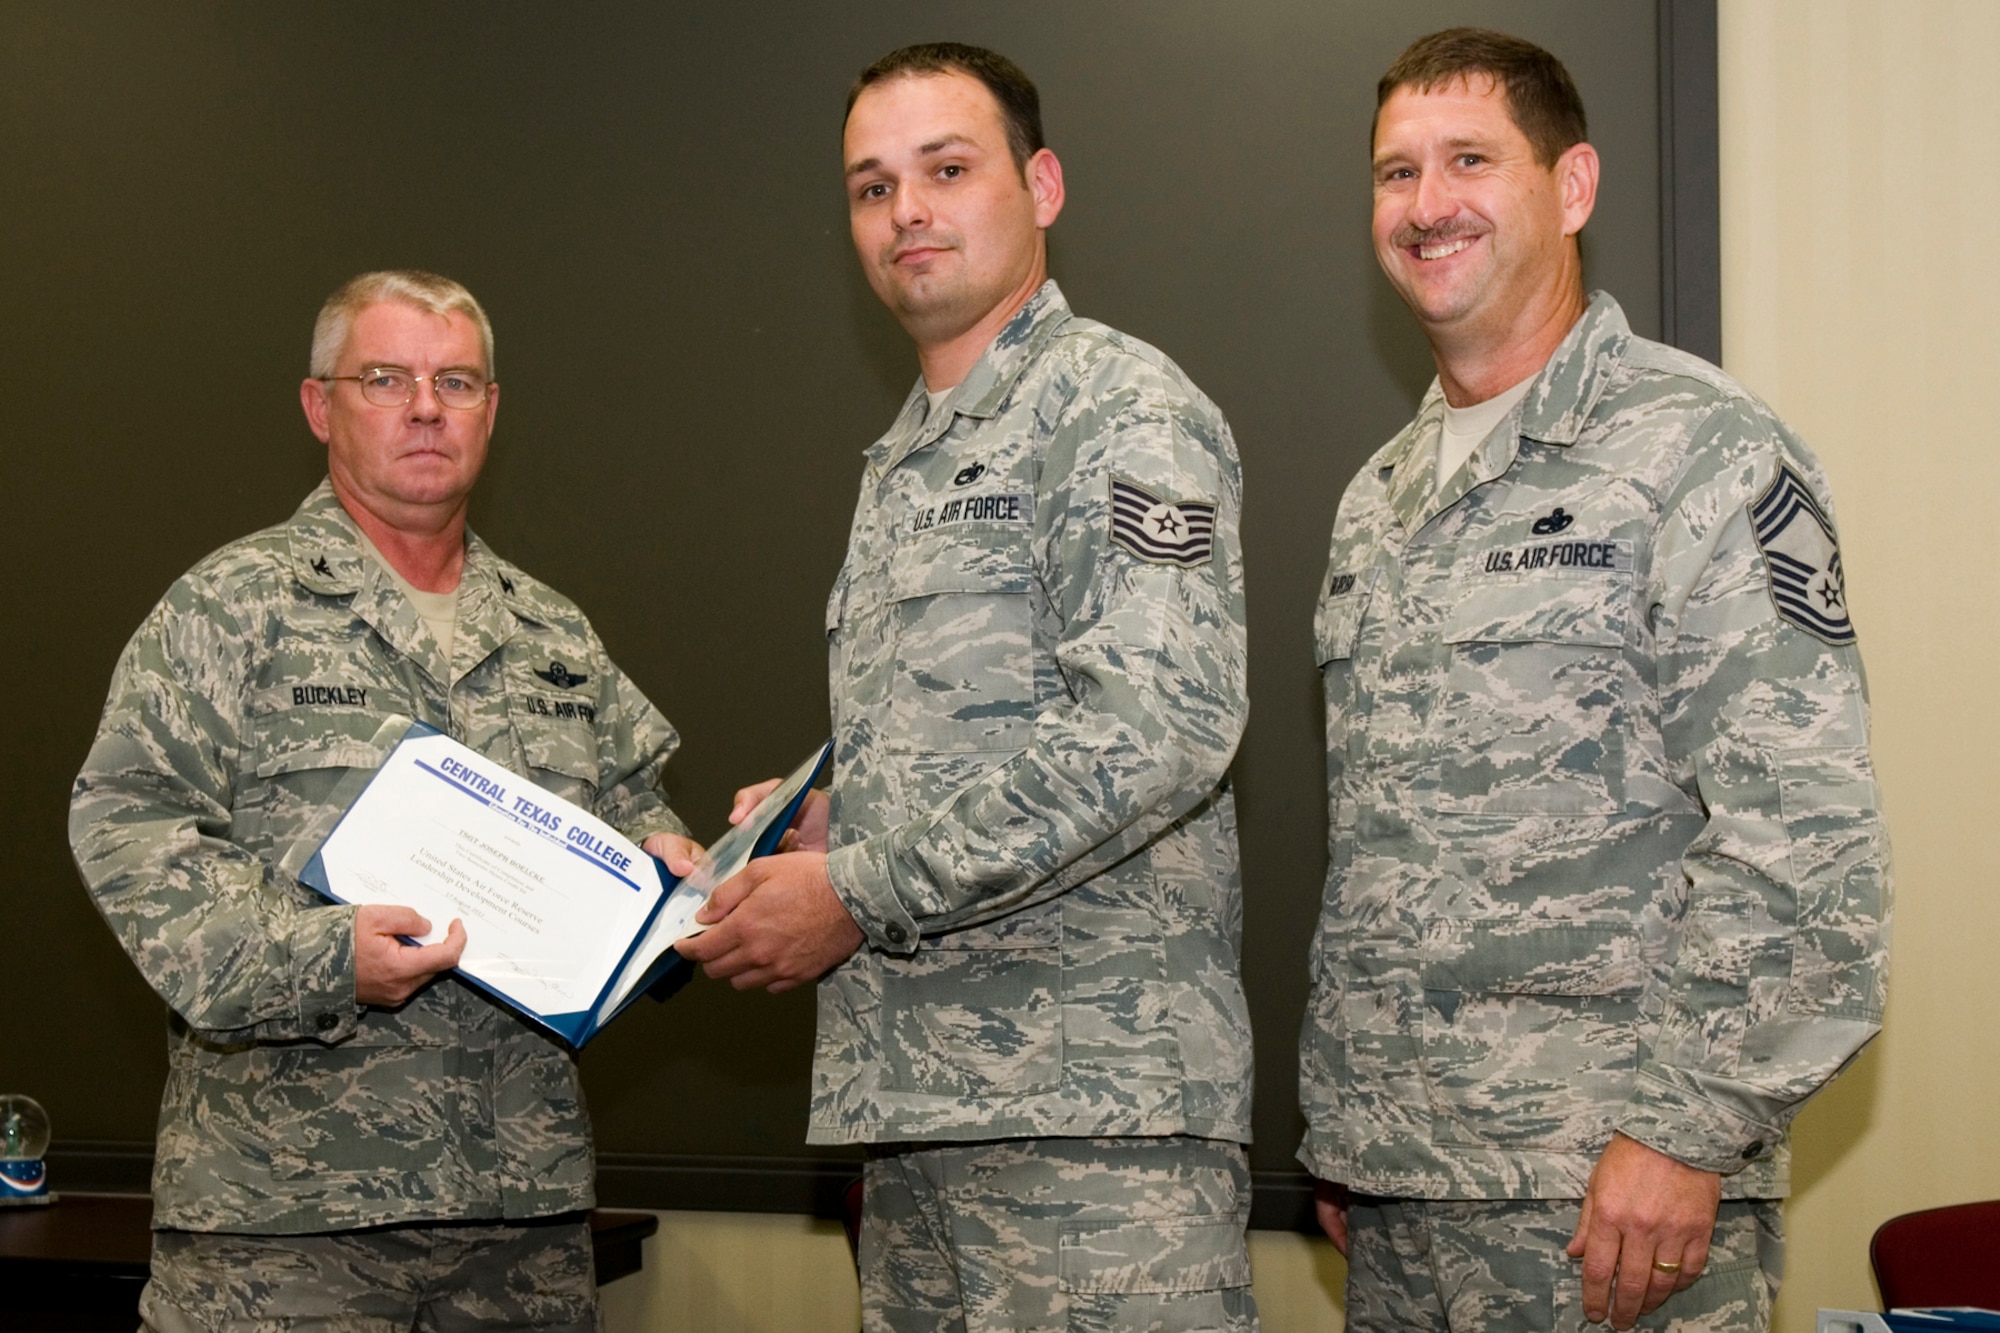 GRISSOM AIR RESERVE BASE, Ind. -- Tech. Sgt. Joseph Boelcke, 434th Aircraft Maintenance Squadron jet engine mechanic, receives a certificate of training from Col. Don Buckley, 434th Air Refueling Wing commander, and Chief Master Sergeant James Burba, 434th Maintenance Operations Flight maintenance superintendent, at a graduation ceremony for a Non-Commissioned Officer  Leadership Development Course here Aug. 17. Boelcke graduated the course with 20 other NCOs. (U.S. Air Force photo/Senior Airman Andrew McLaughlin)